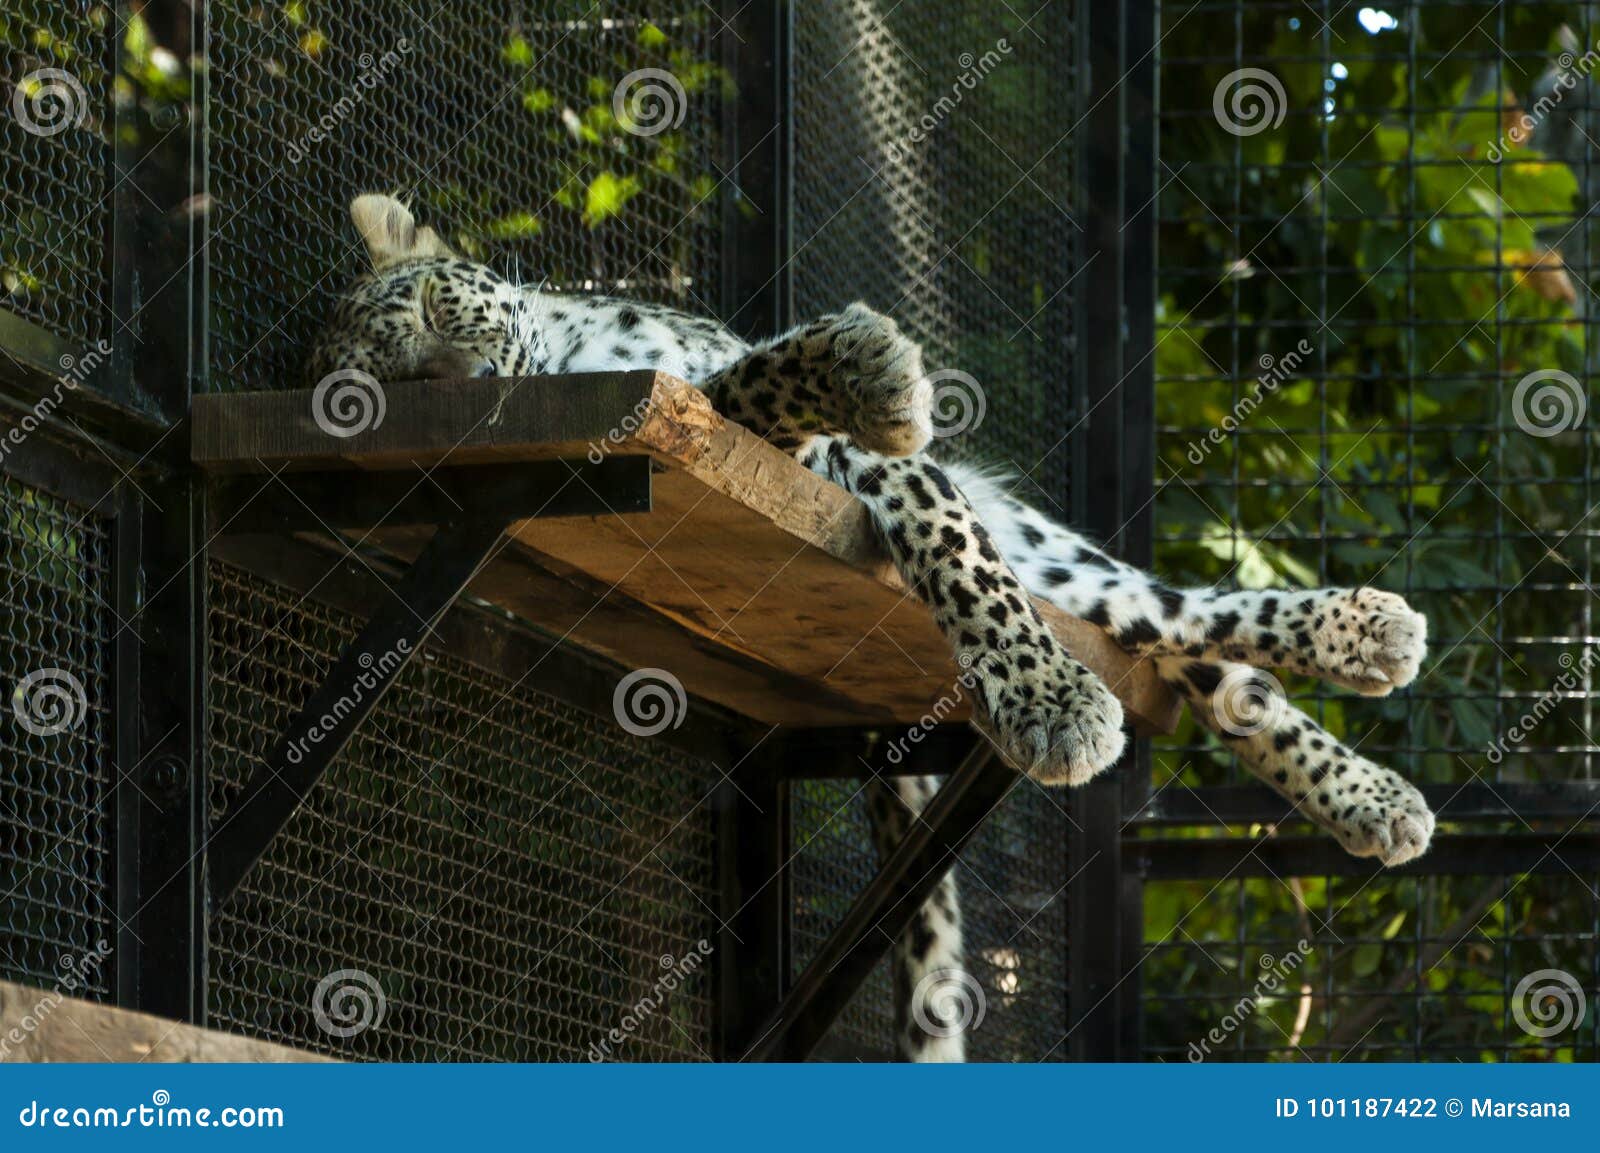 leopard at bioparco